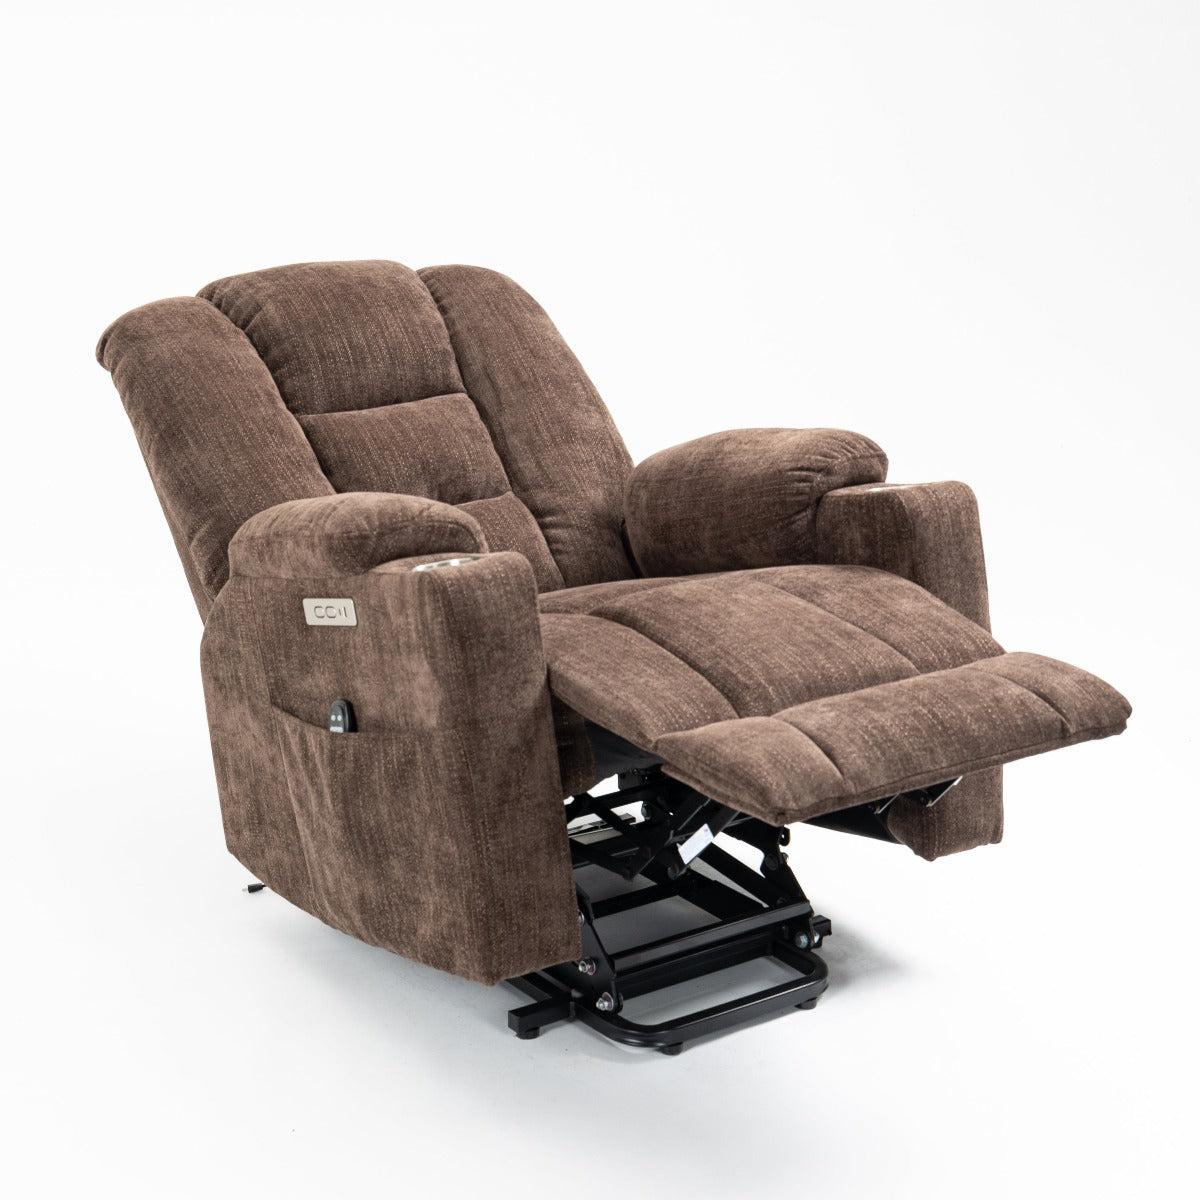 EMON's Power Lift Recliner, reclined position - My Lift Chair